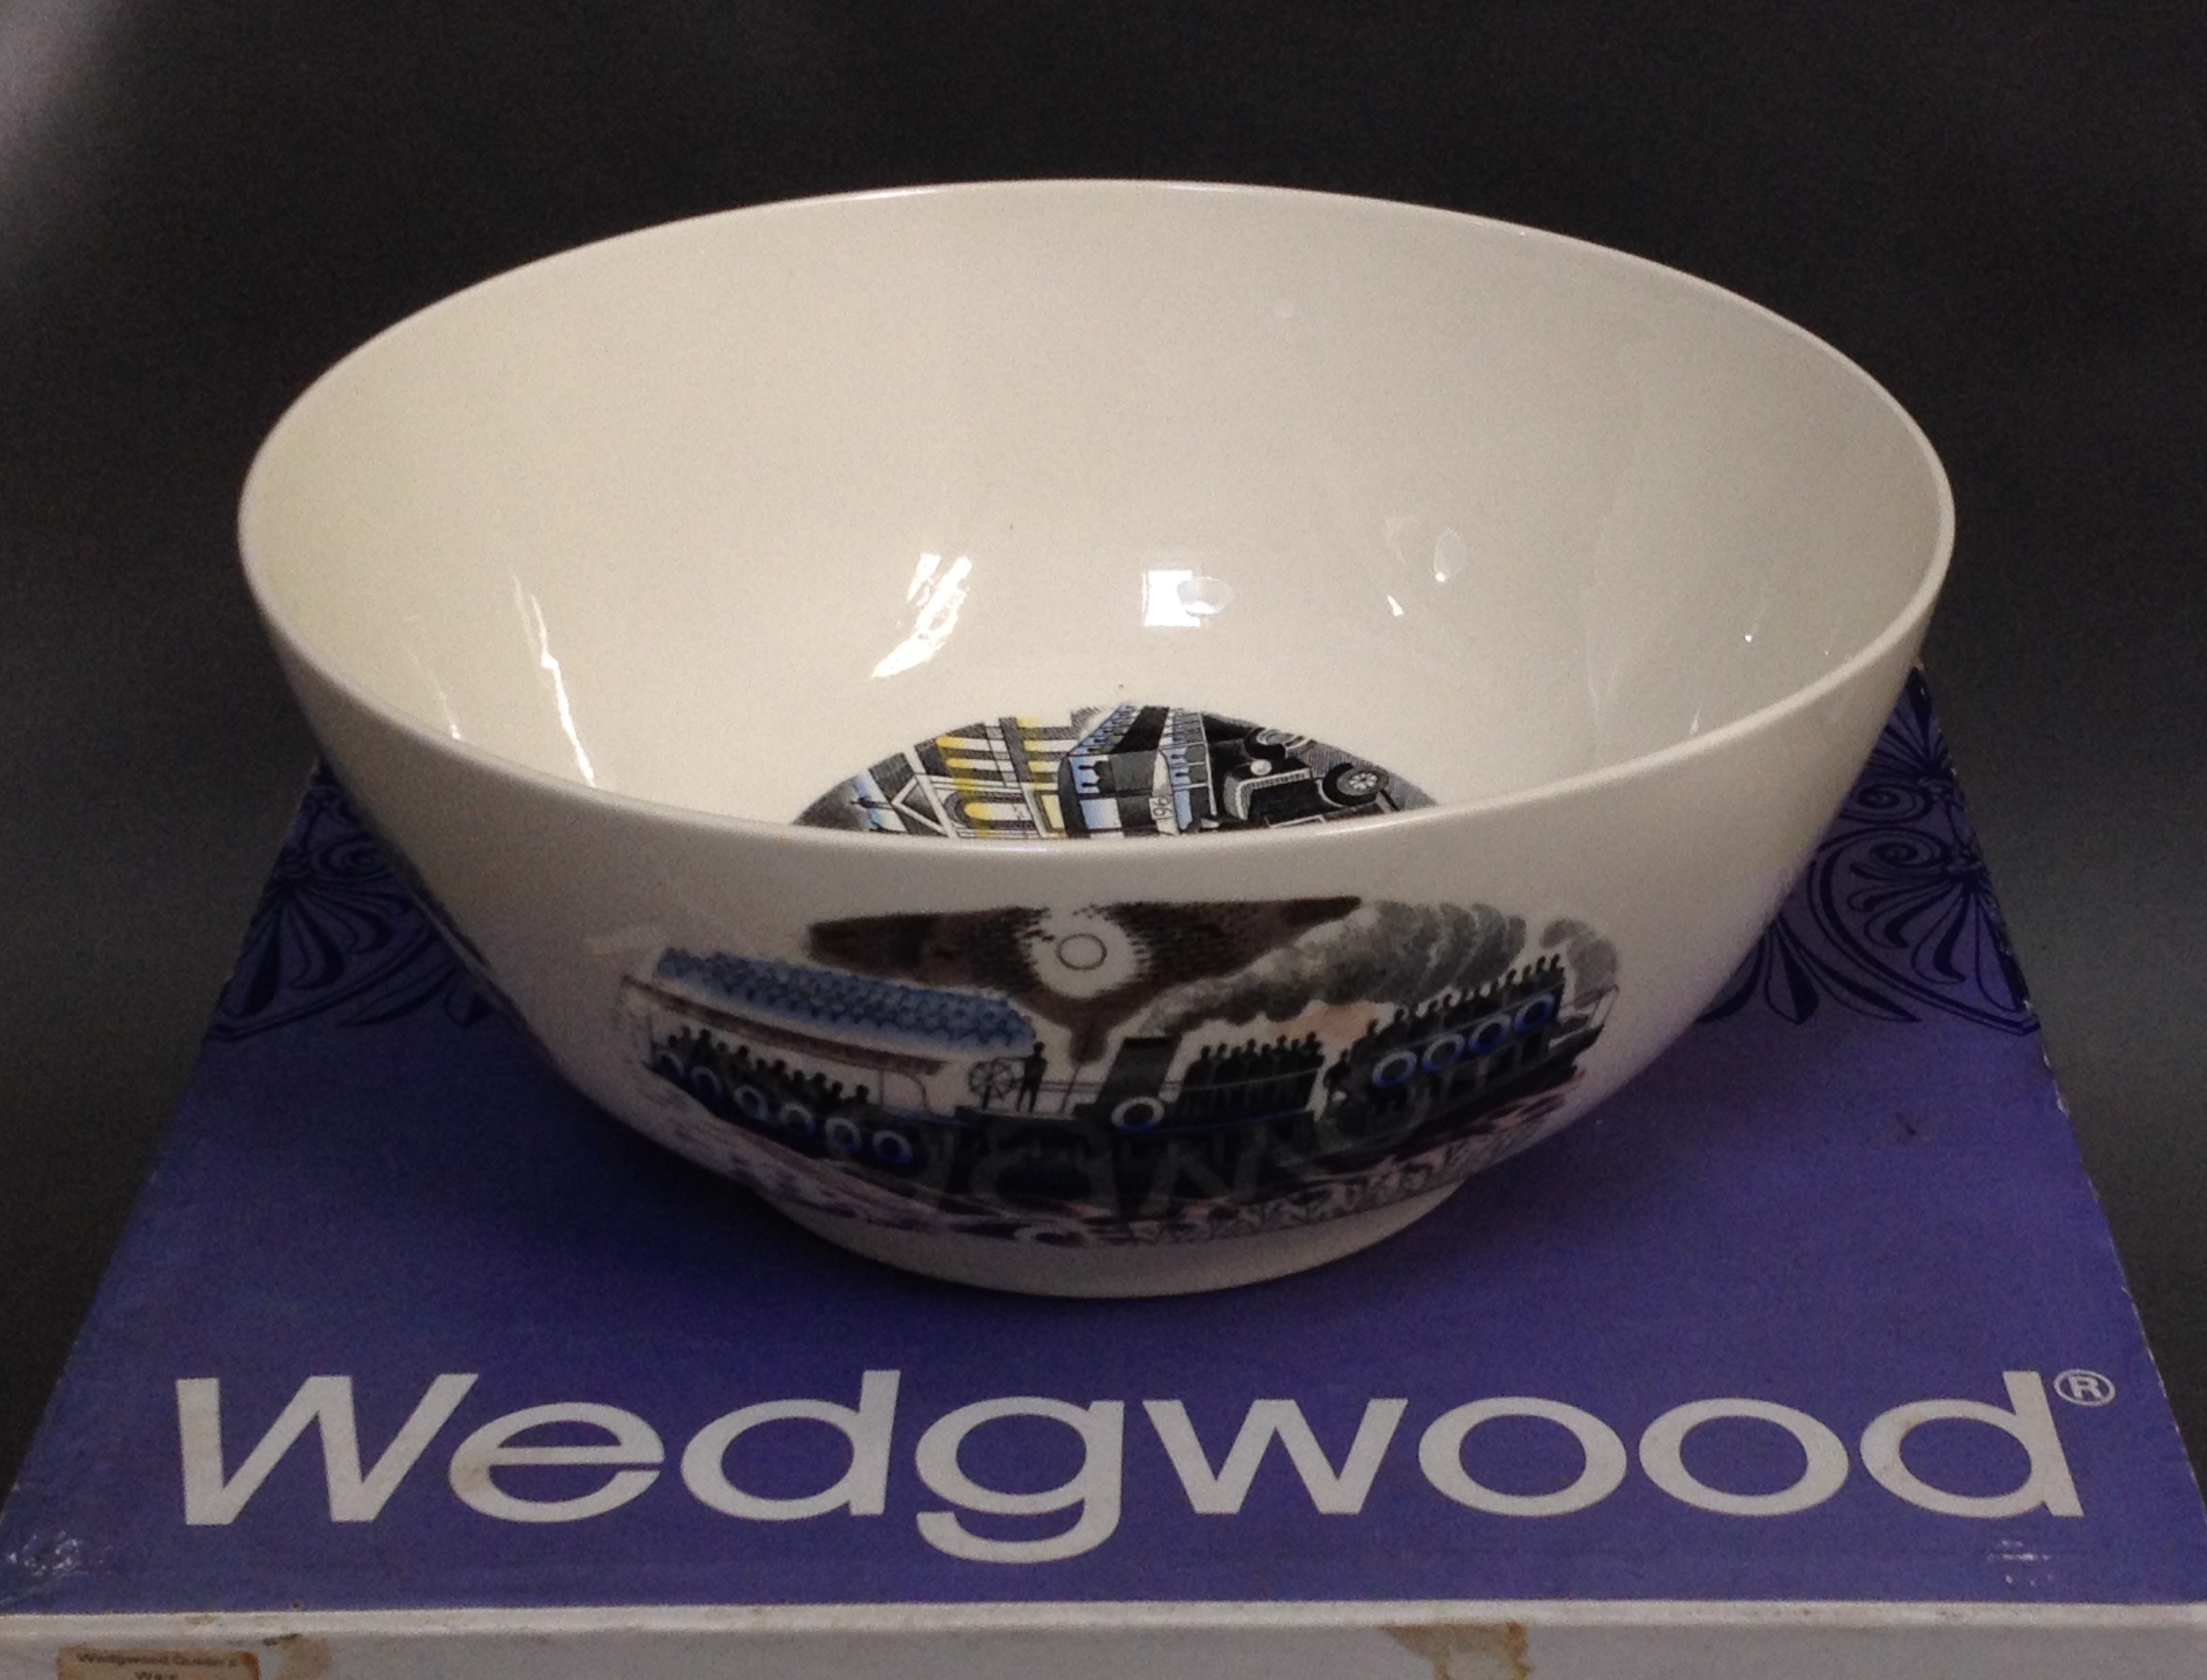 A 1975 Wedgwood Boat Race bowl designed by Eric Ravilious , limited edition no. 133/200, with box